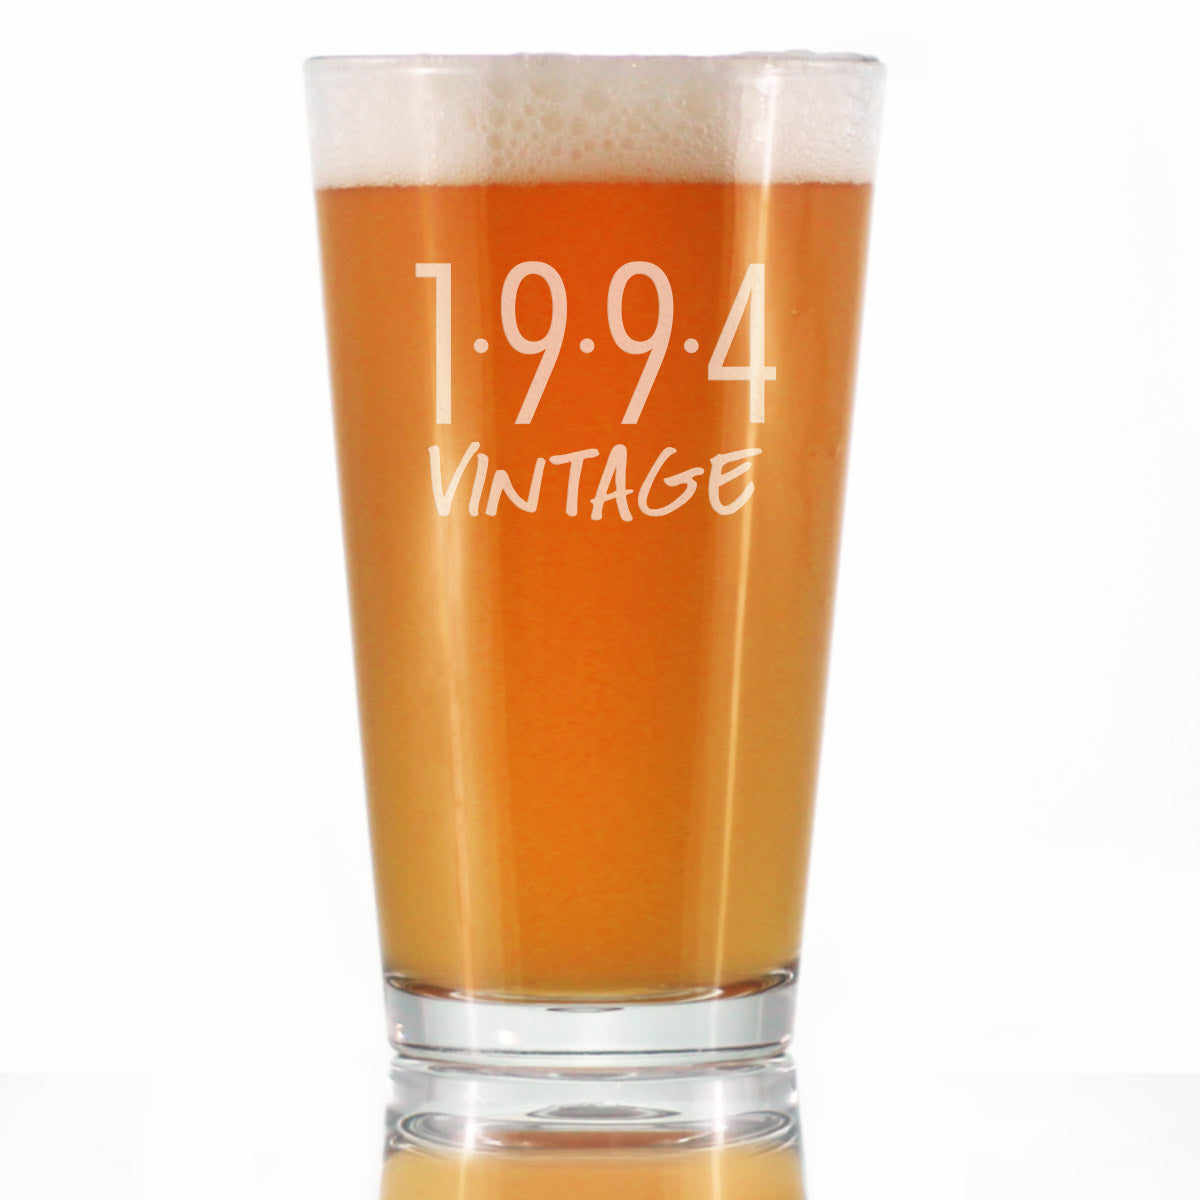 Vintage 1994 - Pint Glass for Beer - 30th Birthday Gifts for Men or Women Turning 30 - Fun Bday Party Decor - 16 oz